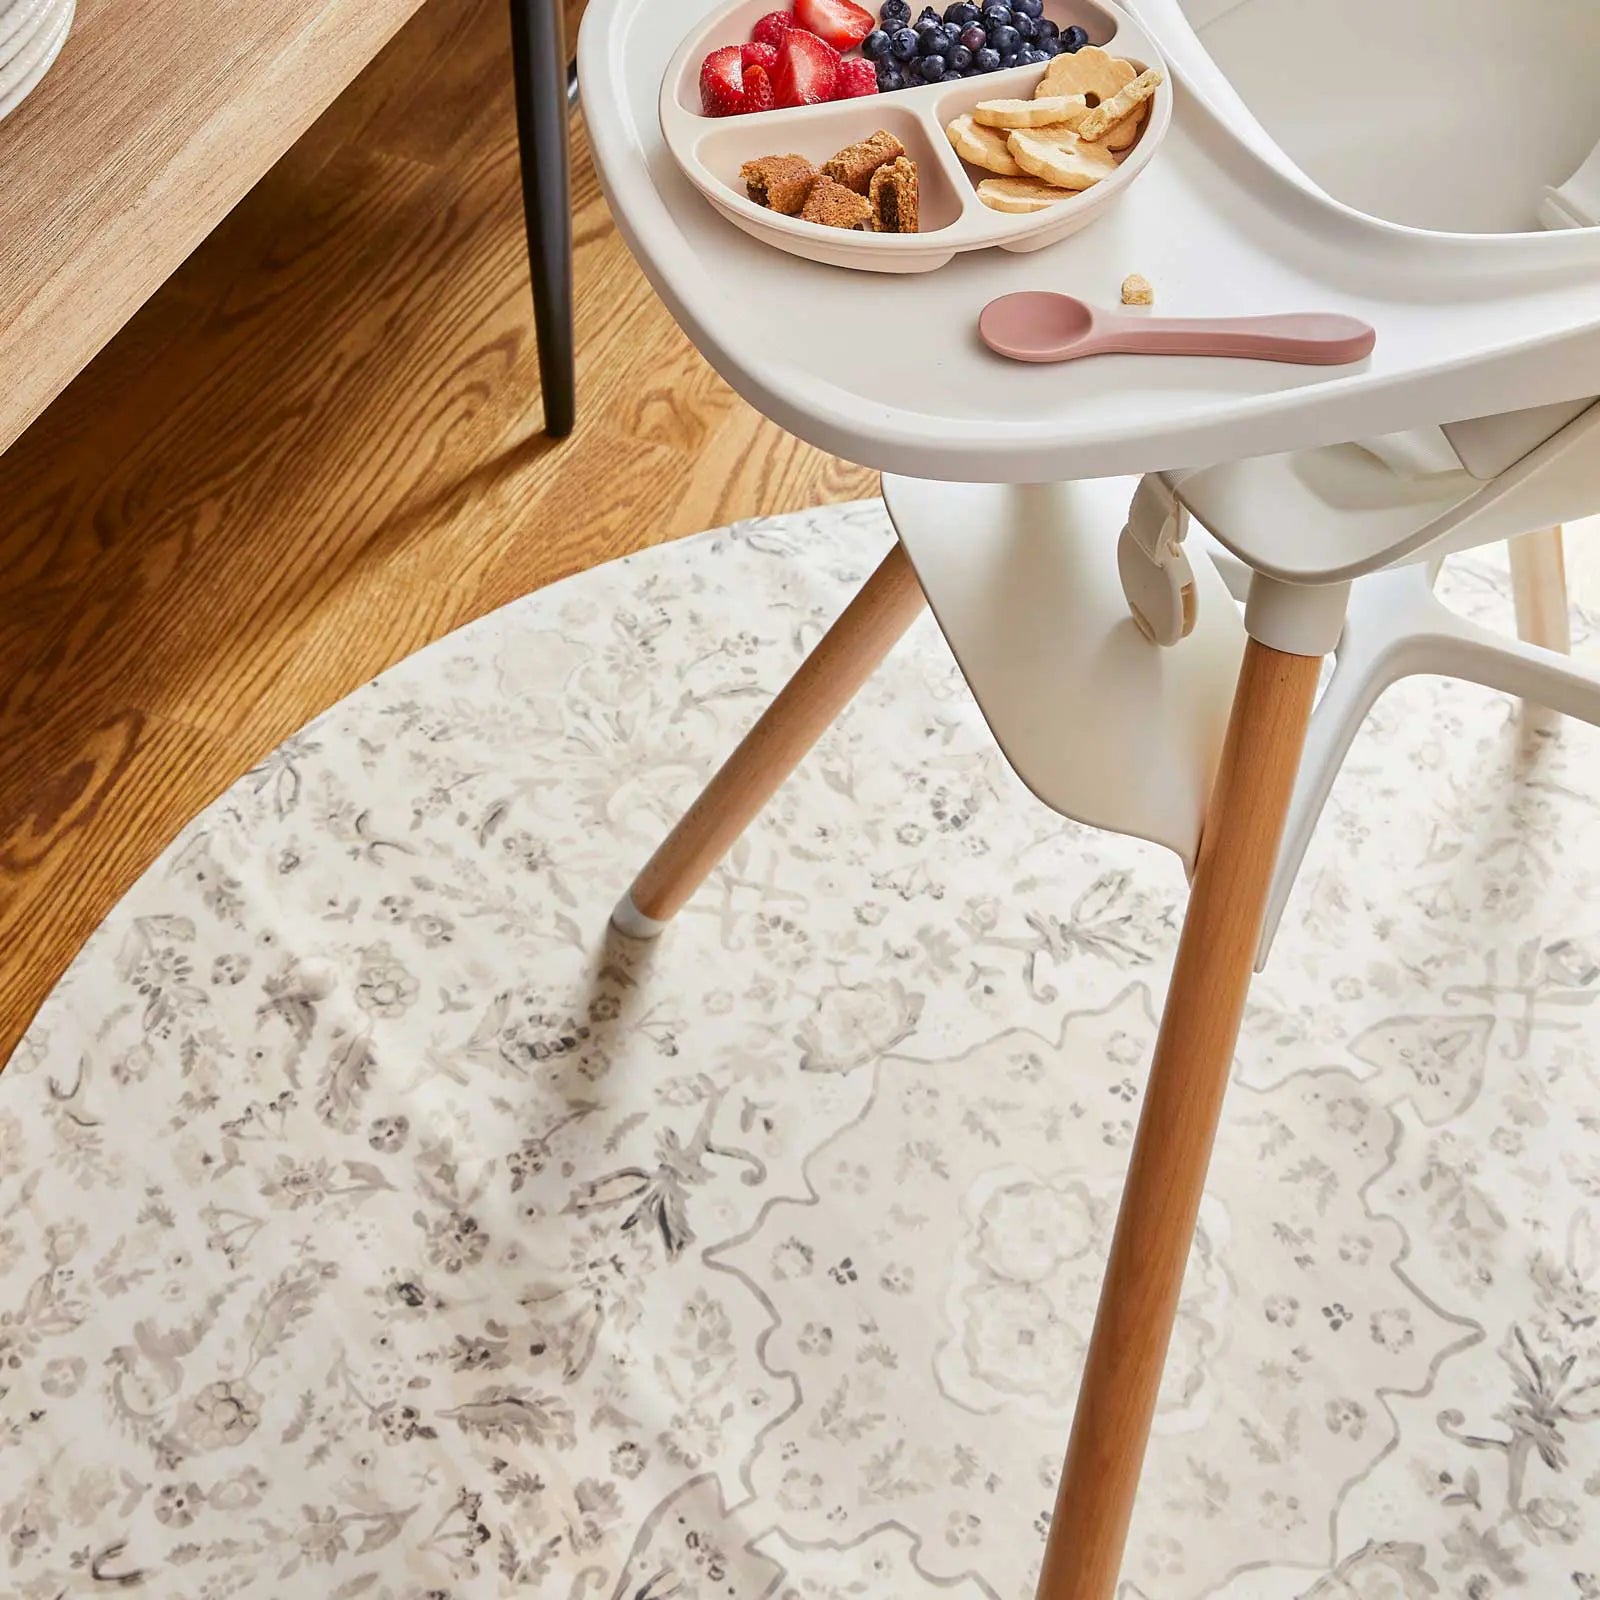 Emile latte neutral beige and gray vintage floral print high chair mat shown underneath a highchair with cookies and fruit on the tray